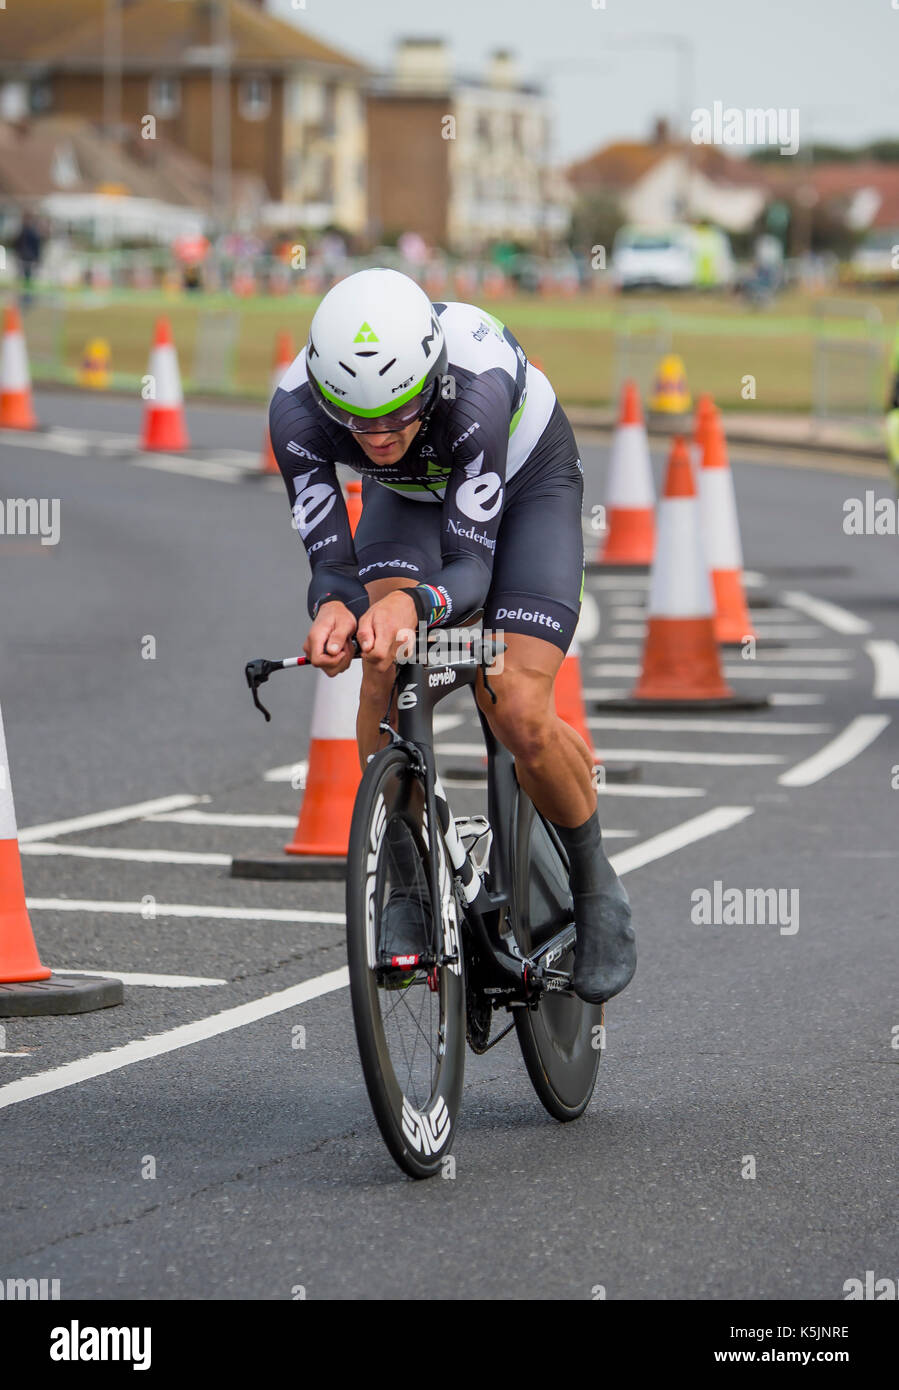 Jay Thompson, Team Dimension Data, Tour of Britain cycle race stage 5 timetrial at Clacton on sea, UK Stock Photo